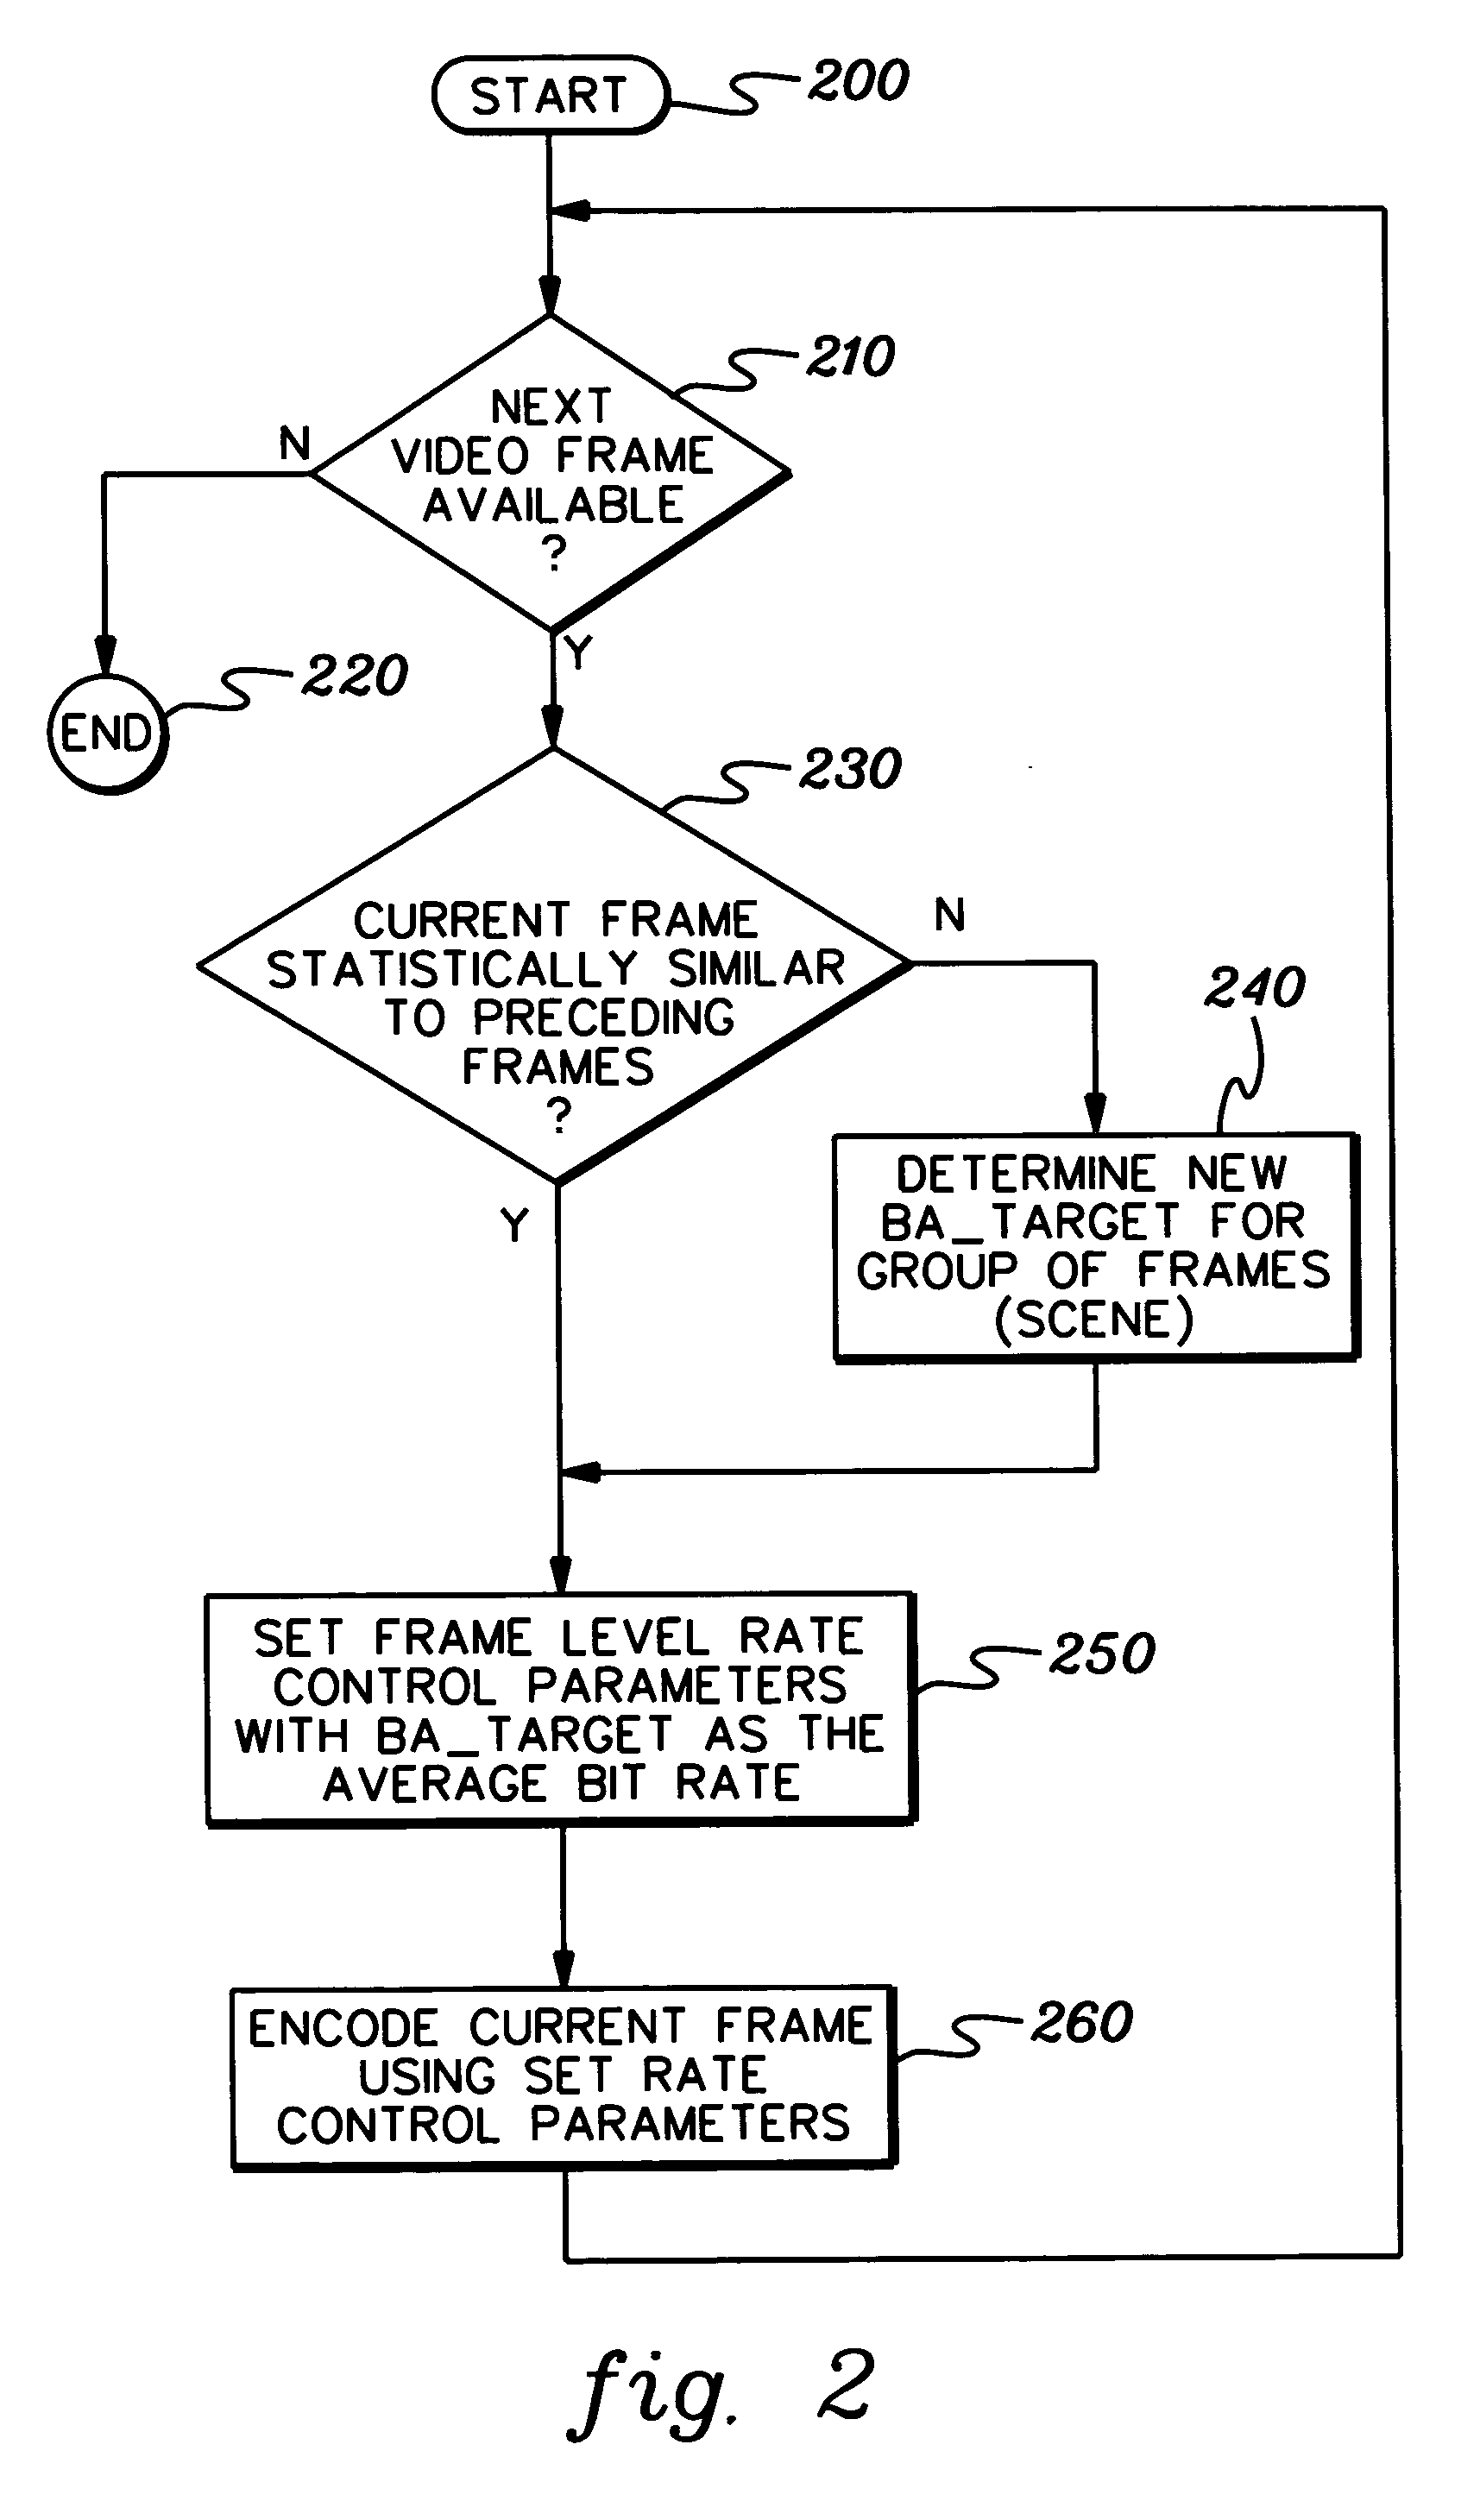 Single pass variable bit rate control strategy and encoder for processing a video frame of a sequence of video frames